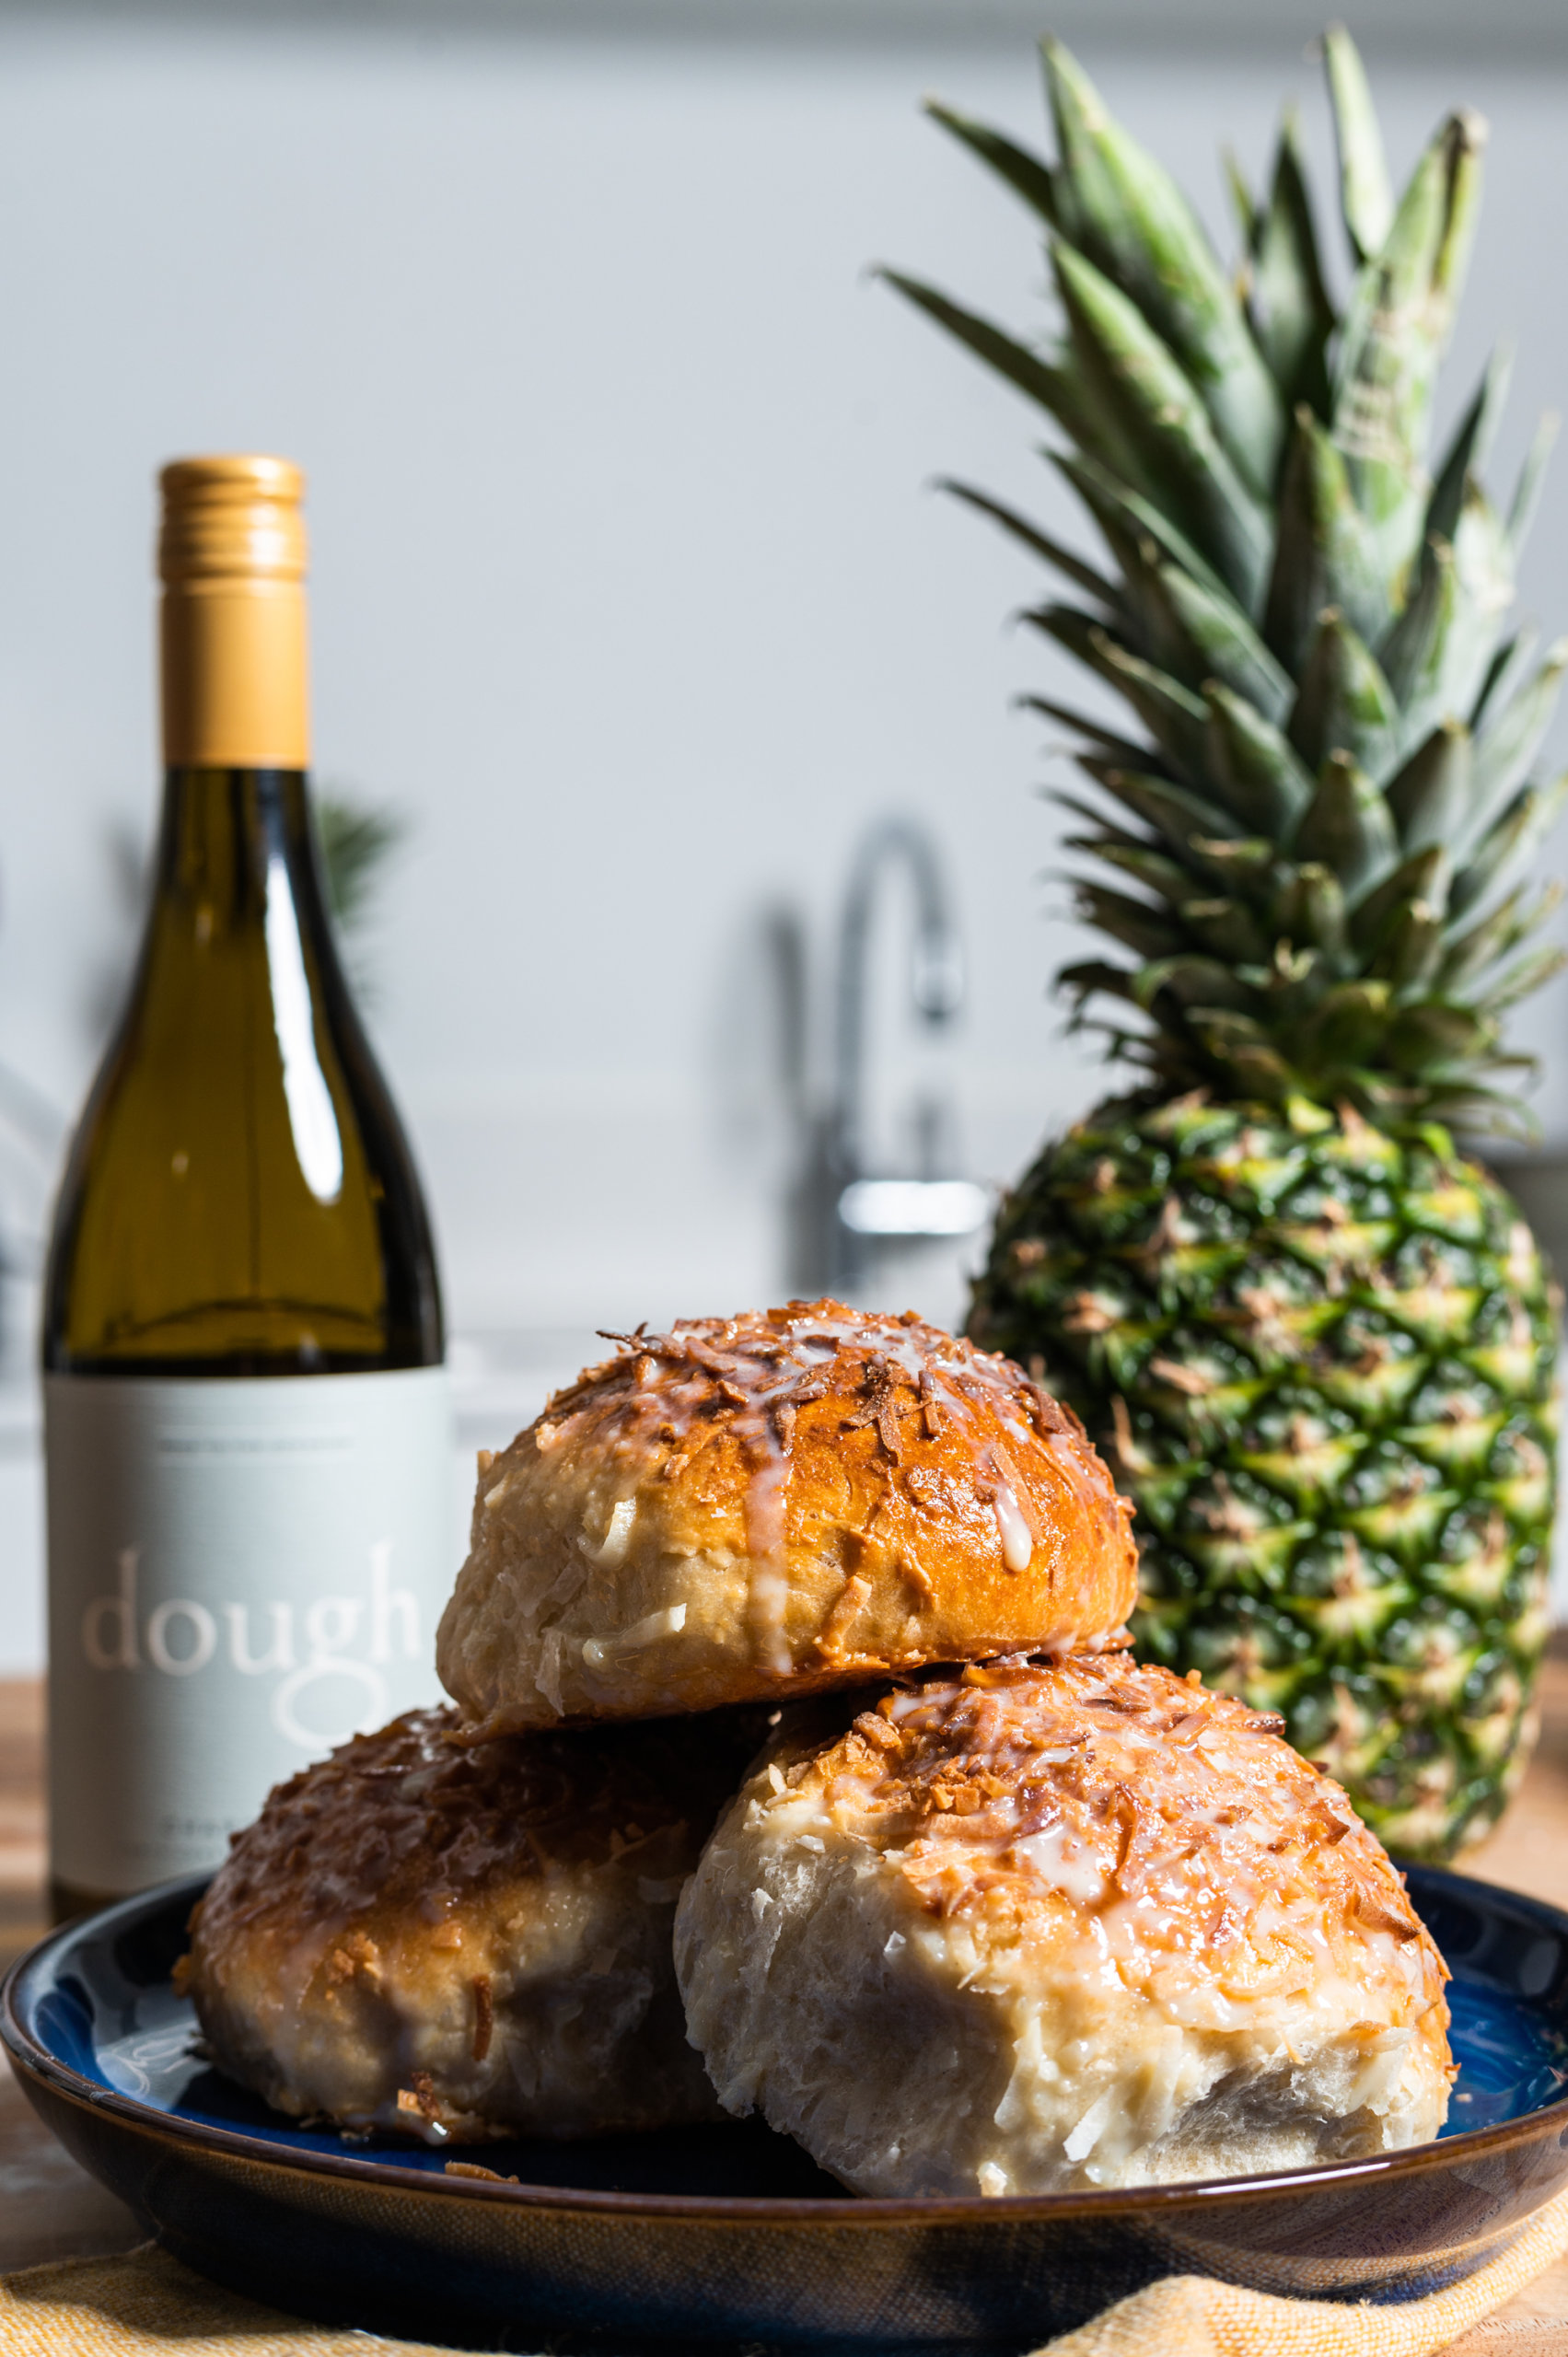 Bryan Ford's pan de coco on display with a bottle of Dough Wines chardonnay and a fresh pineapple